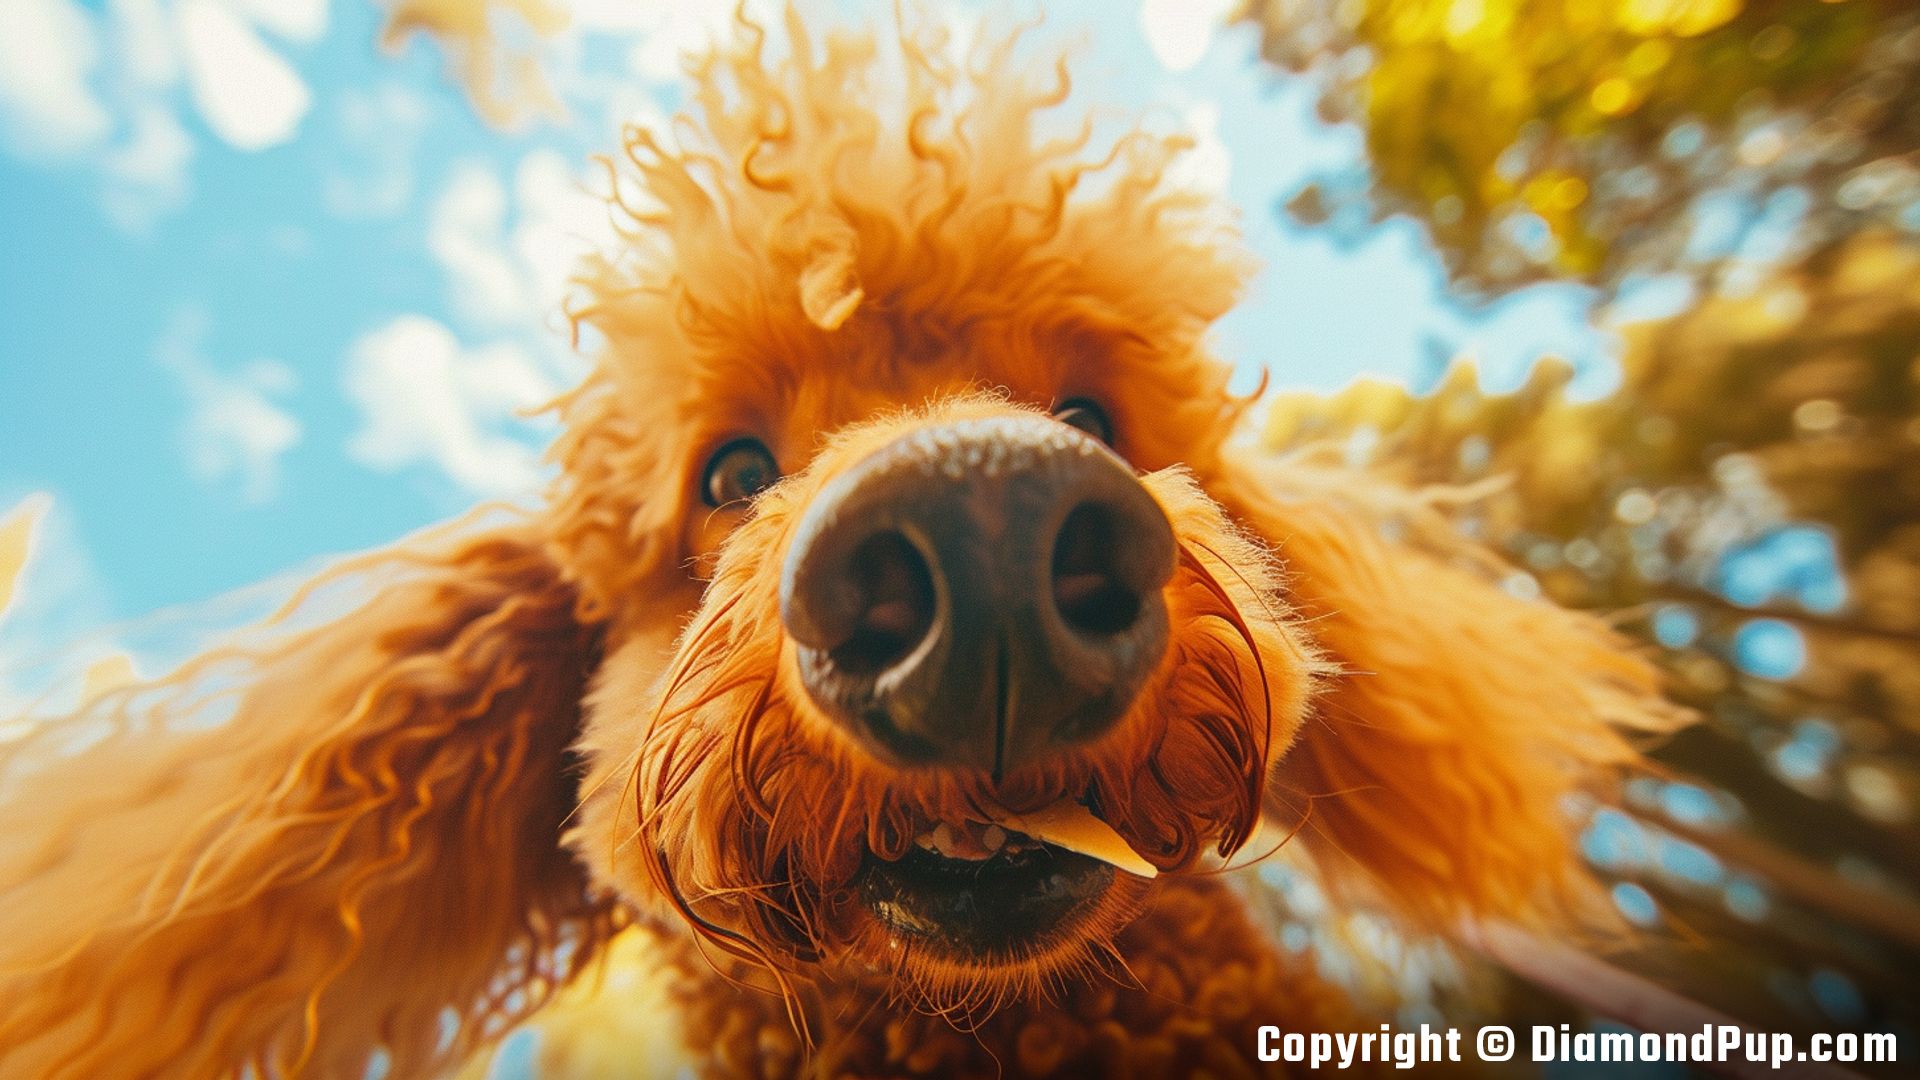 Photograph of a Playful Poodle Eating Pasta